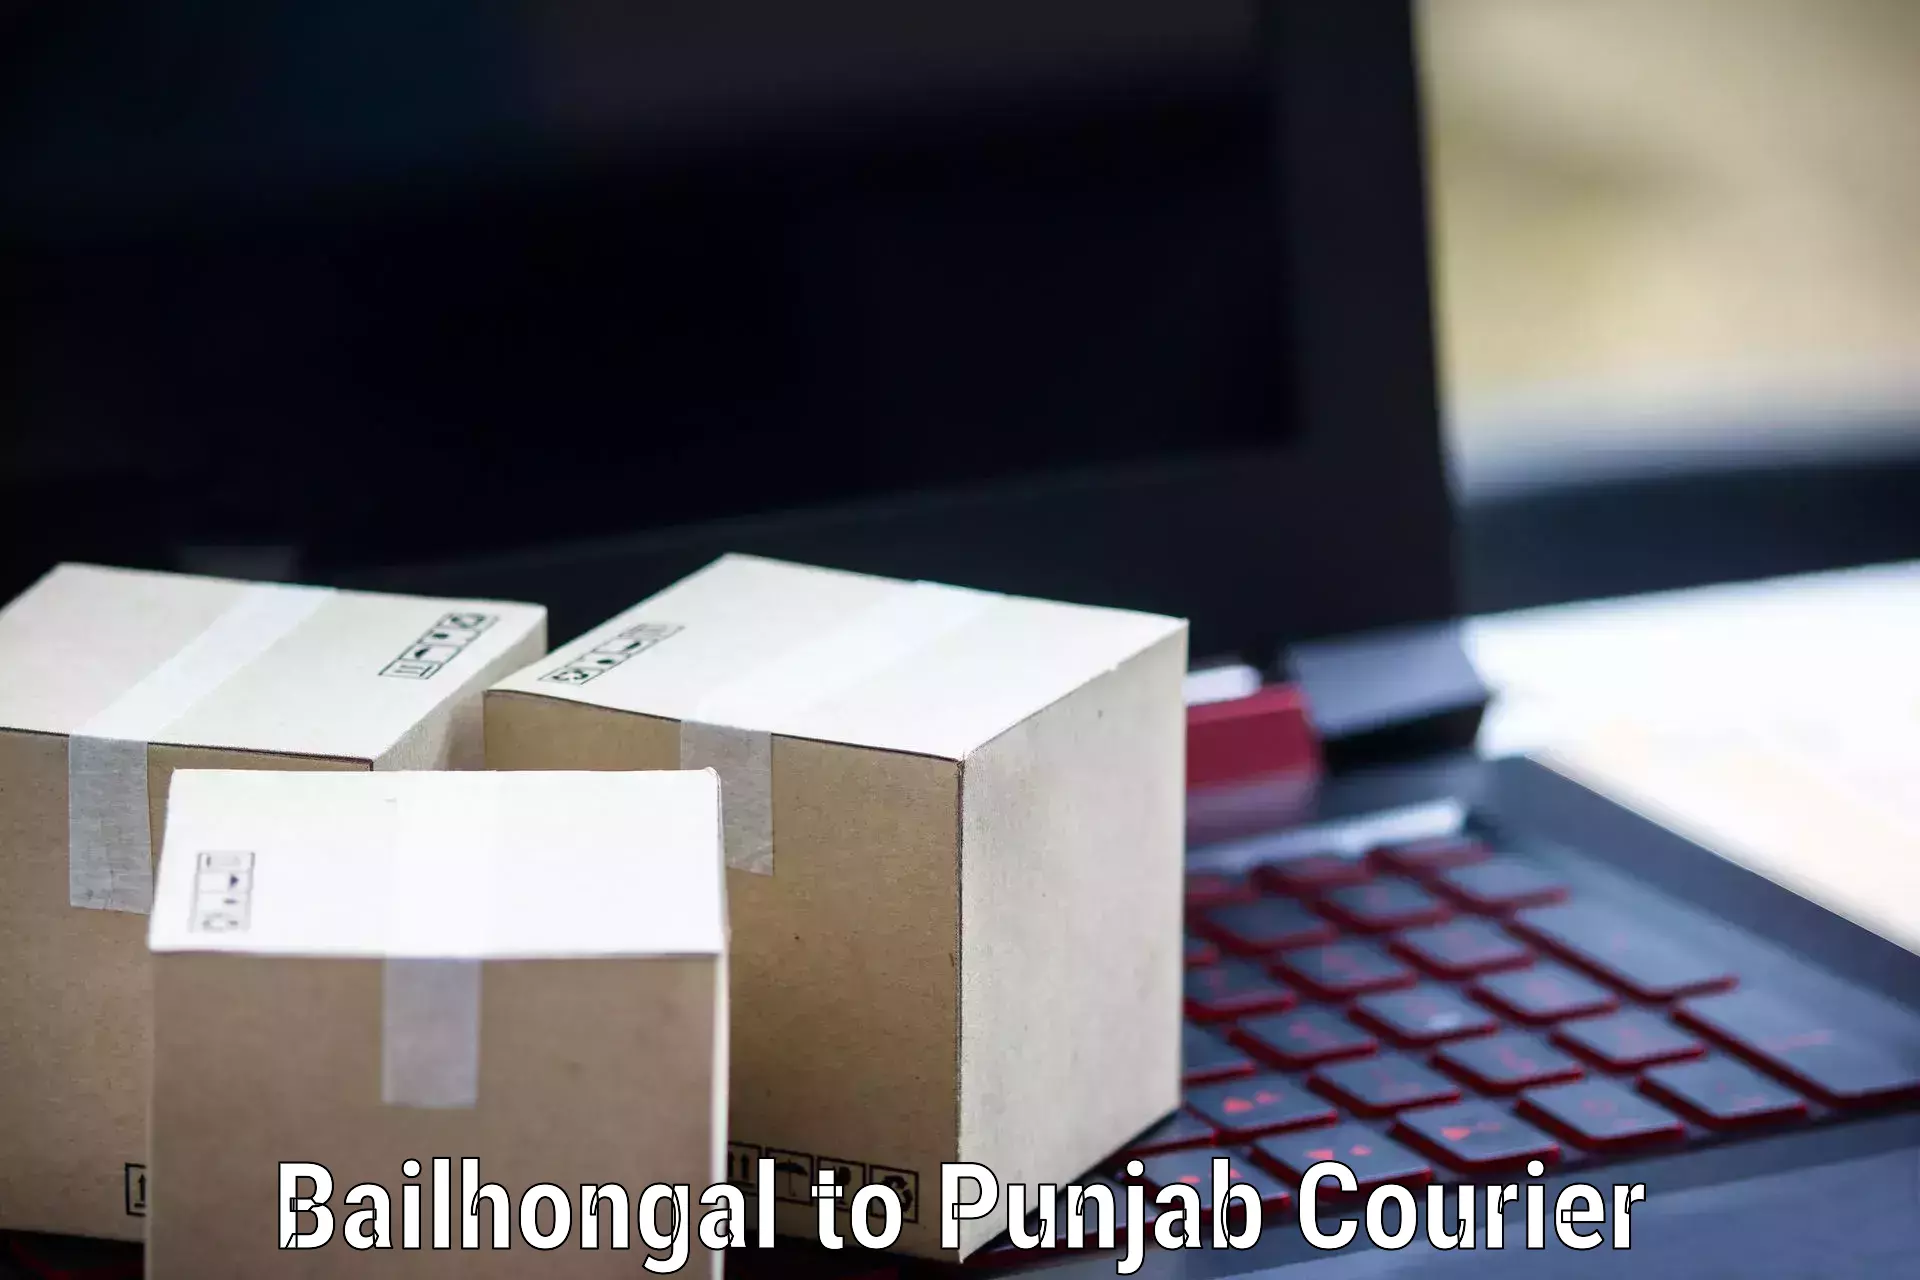 Nationwide courier service Bailhongal to Sultanpur Lodhi